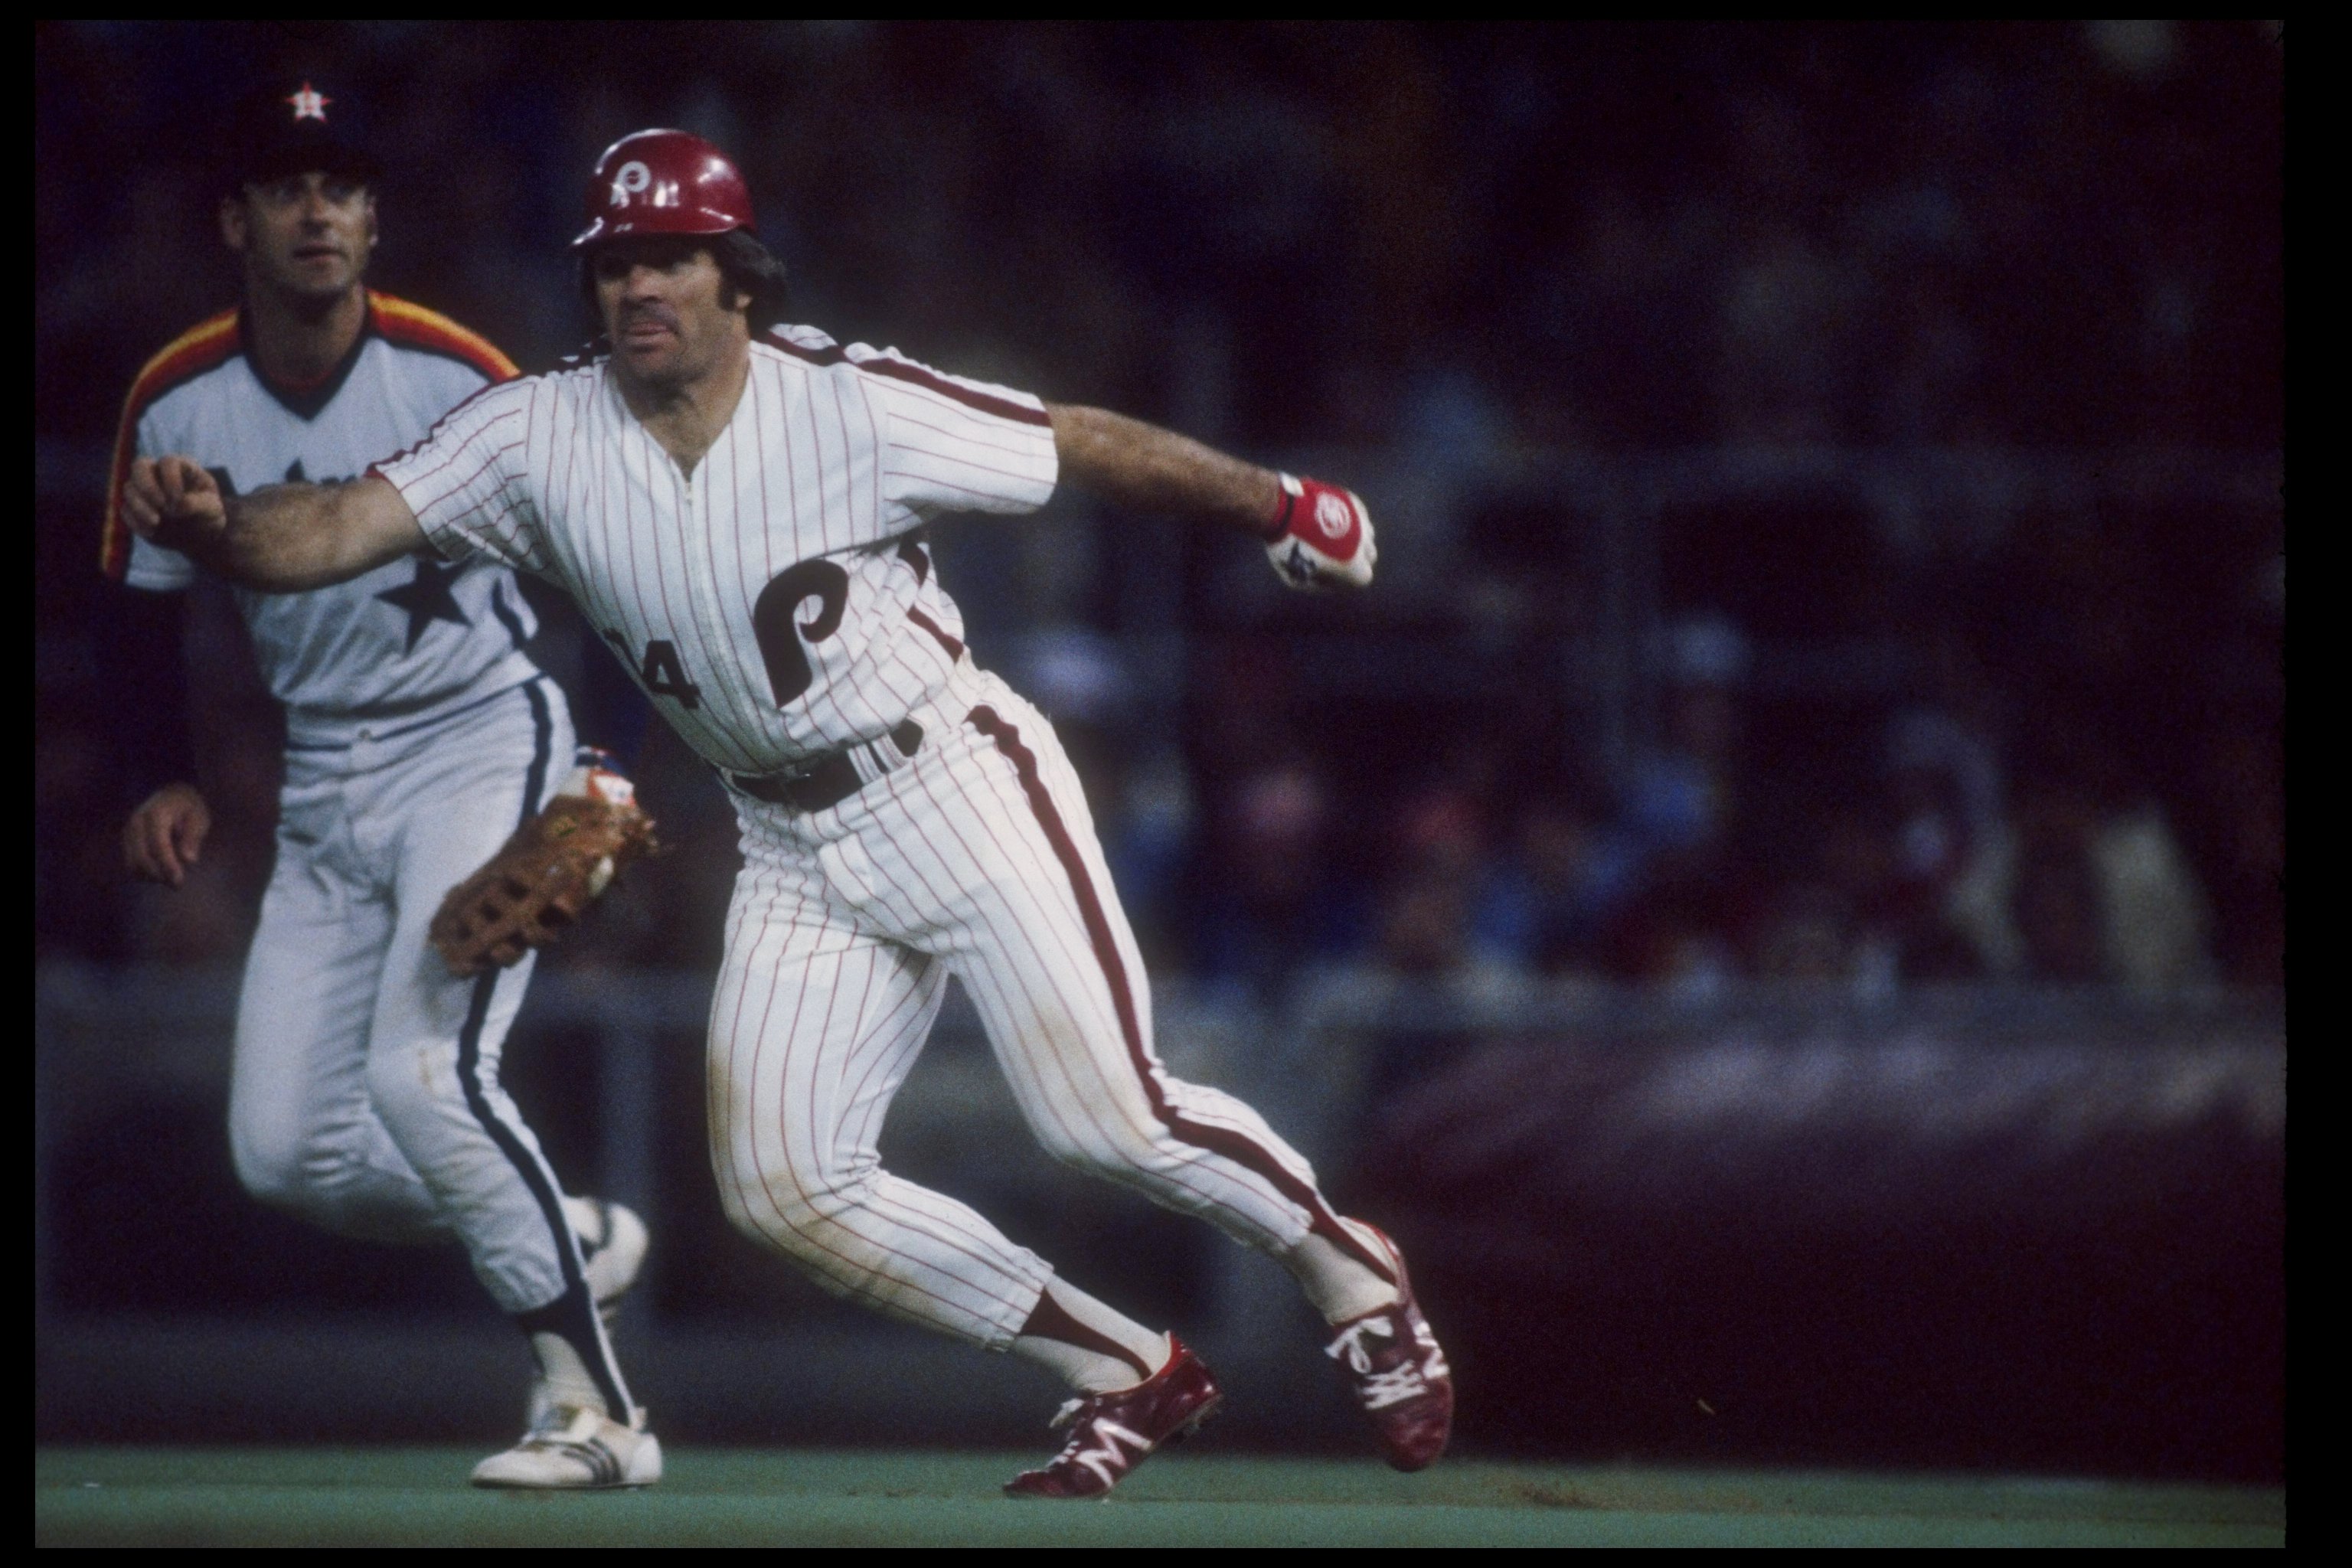 PHILADELPHIA PHILLIES OUTFIELDER LENNY DYKSTRA PUTS HIS FAMOUS